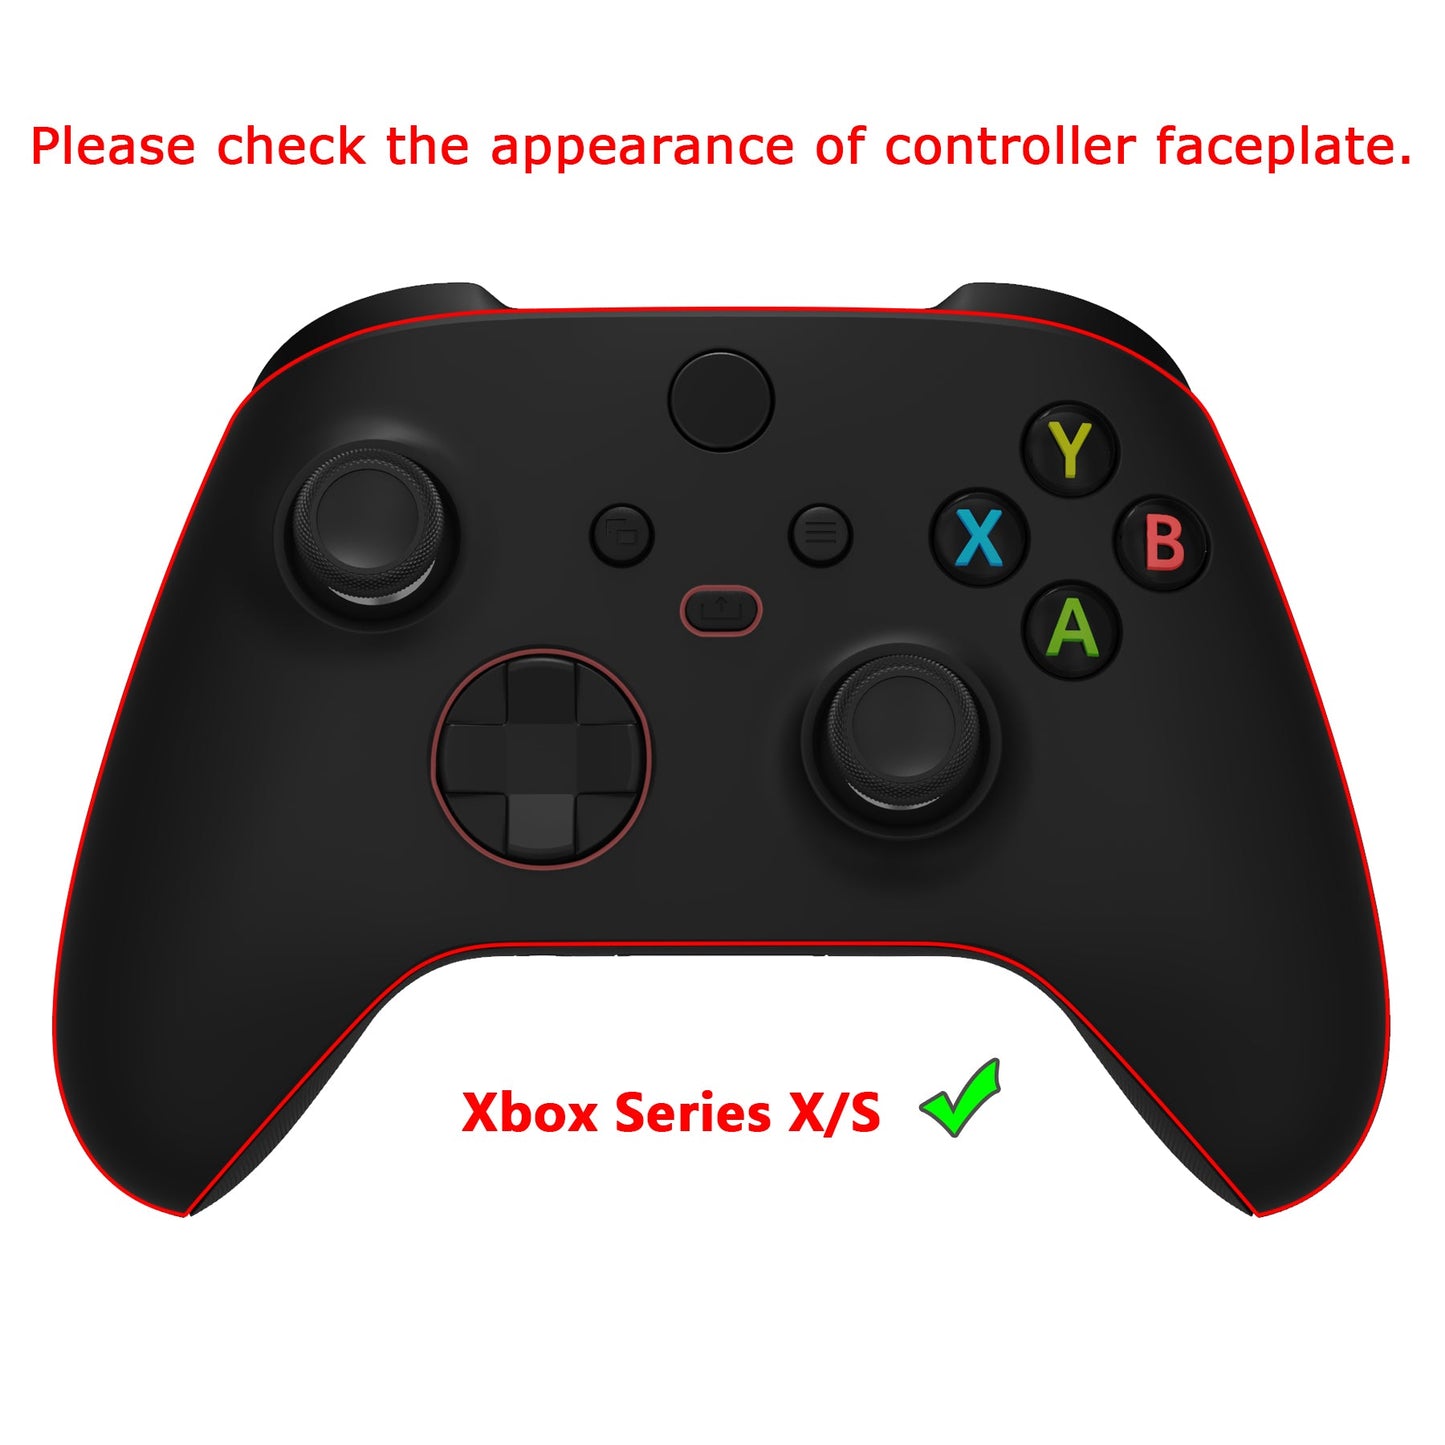 eXtremeRate Retail Textured Black Back Panels, Comfortable Non-Slip Side Rails, 3D Splashing Handles, Game Improvement Replacement Parts for Xbox Series X/S Controller - Controller NOT Included - PX3P340